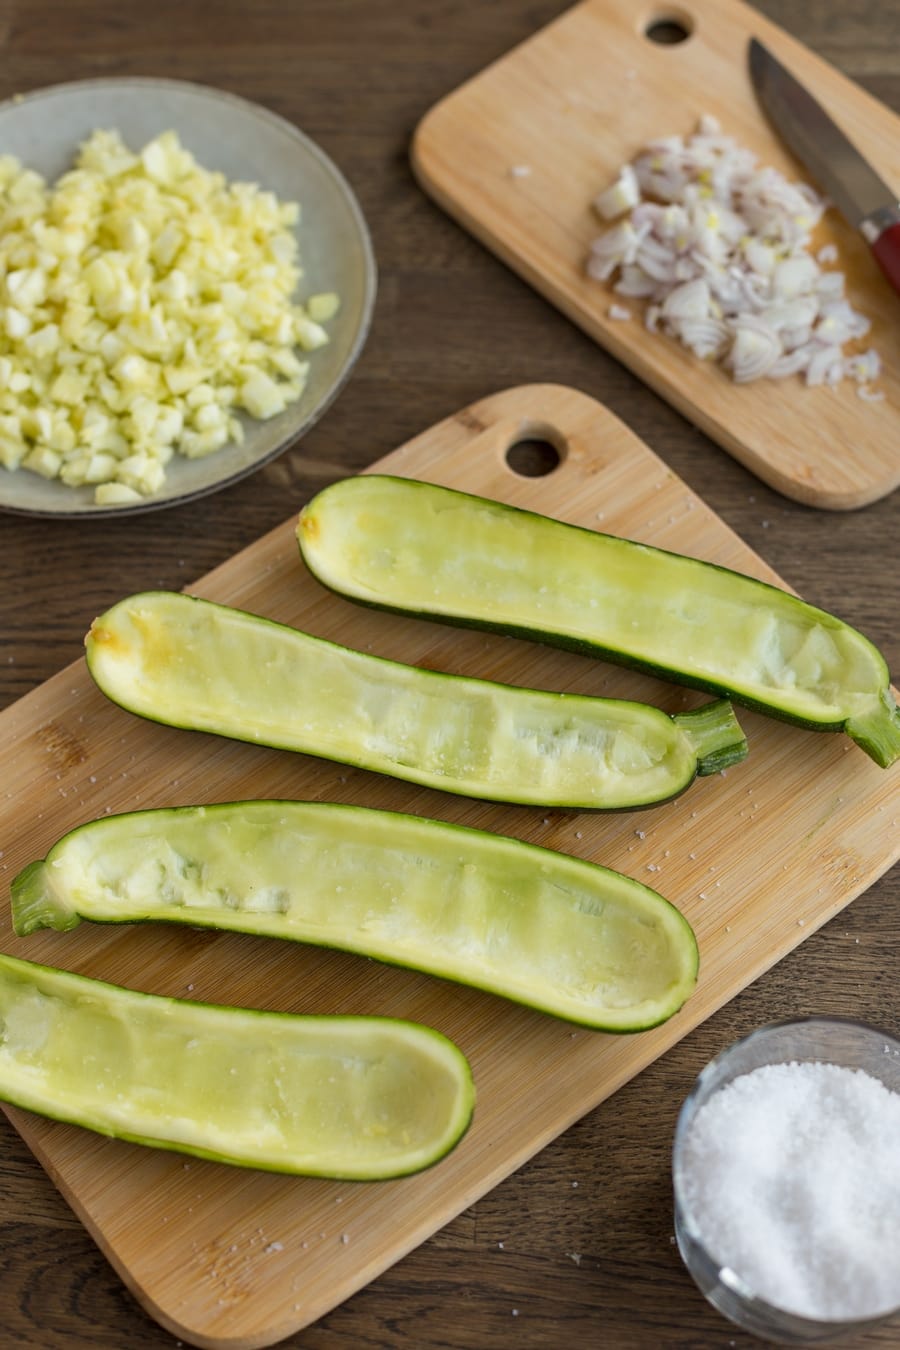 Carved out zucchini halves on wooden board, other chopped ingredients laid around.